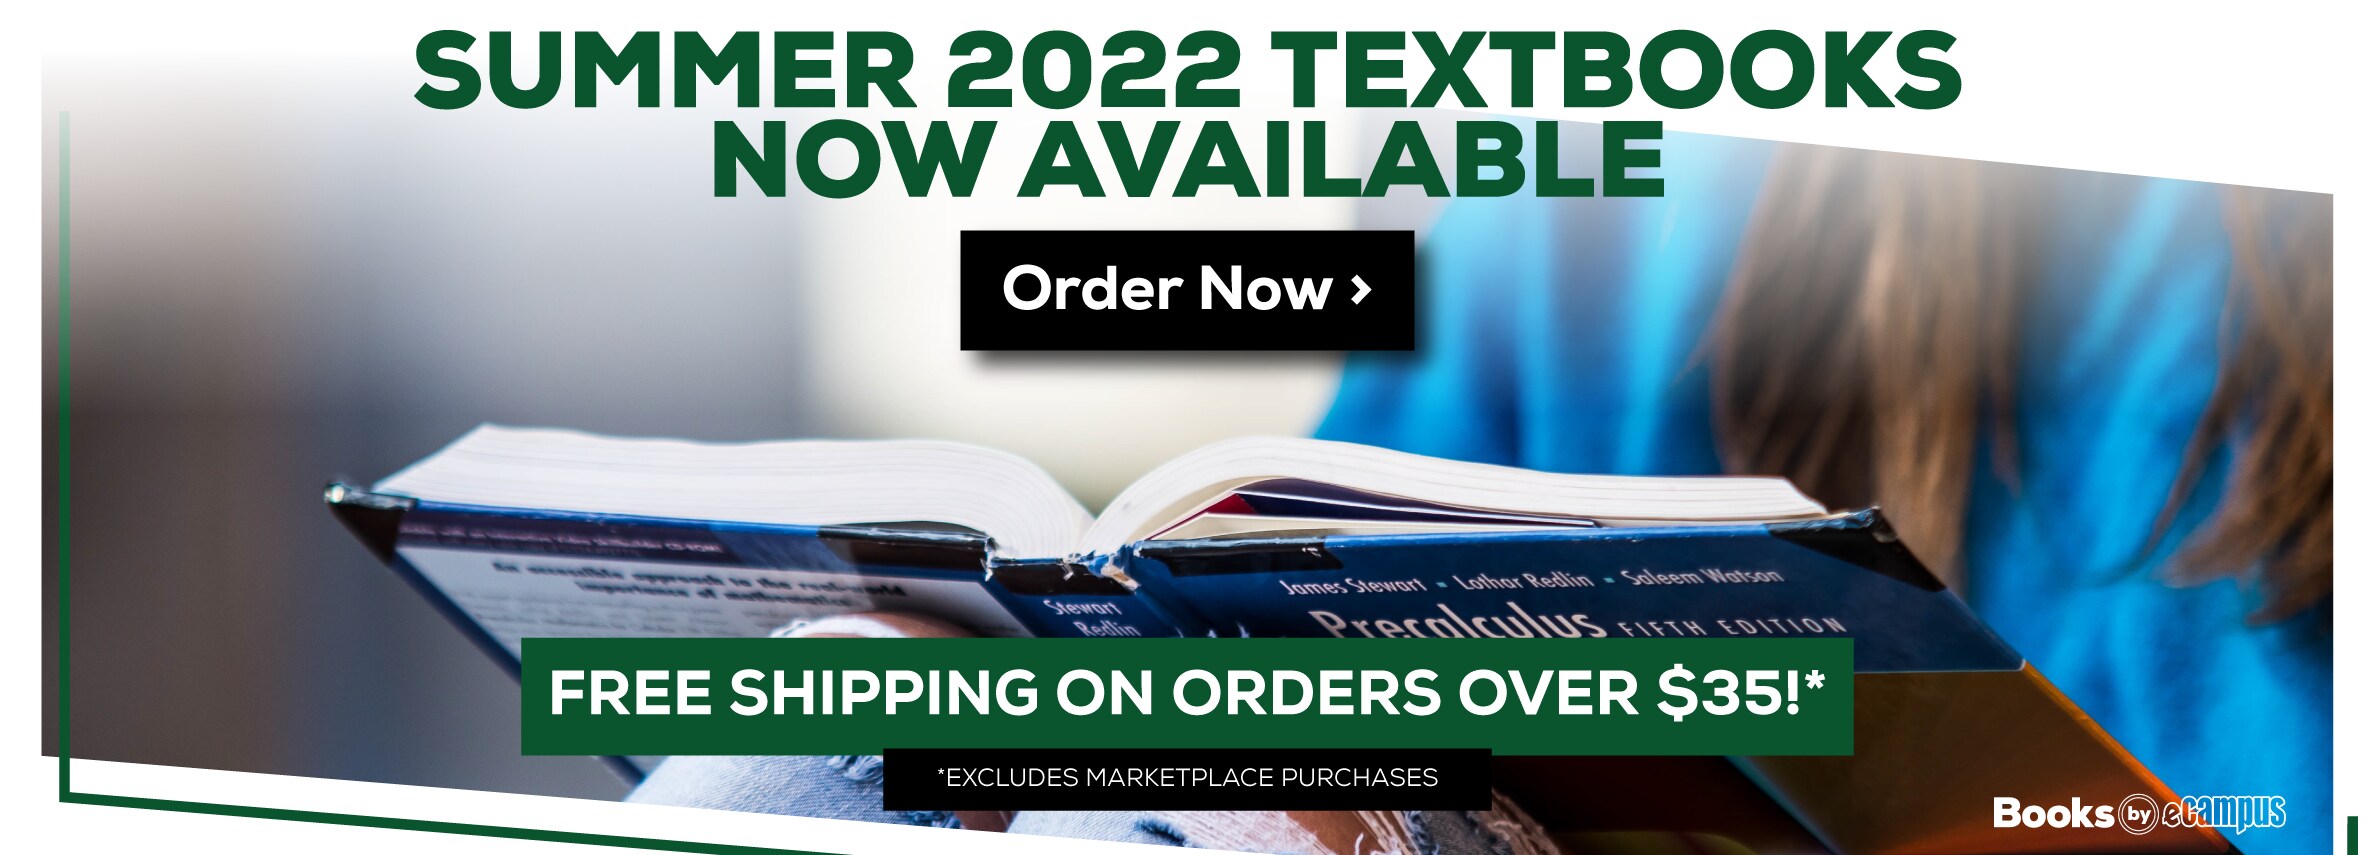 Summer 2022 Textbooks Now Available. Free shipping on orders over $35! Excludes marketplace purchases. Order Now.